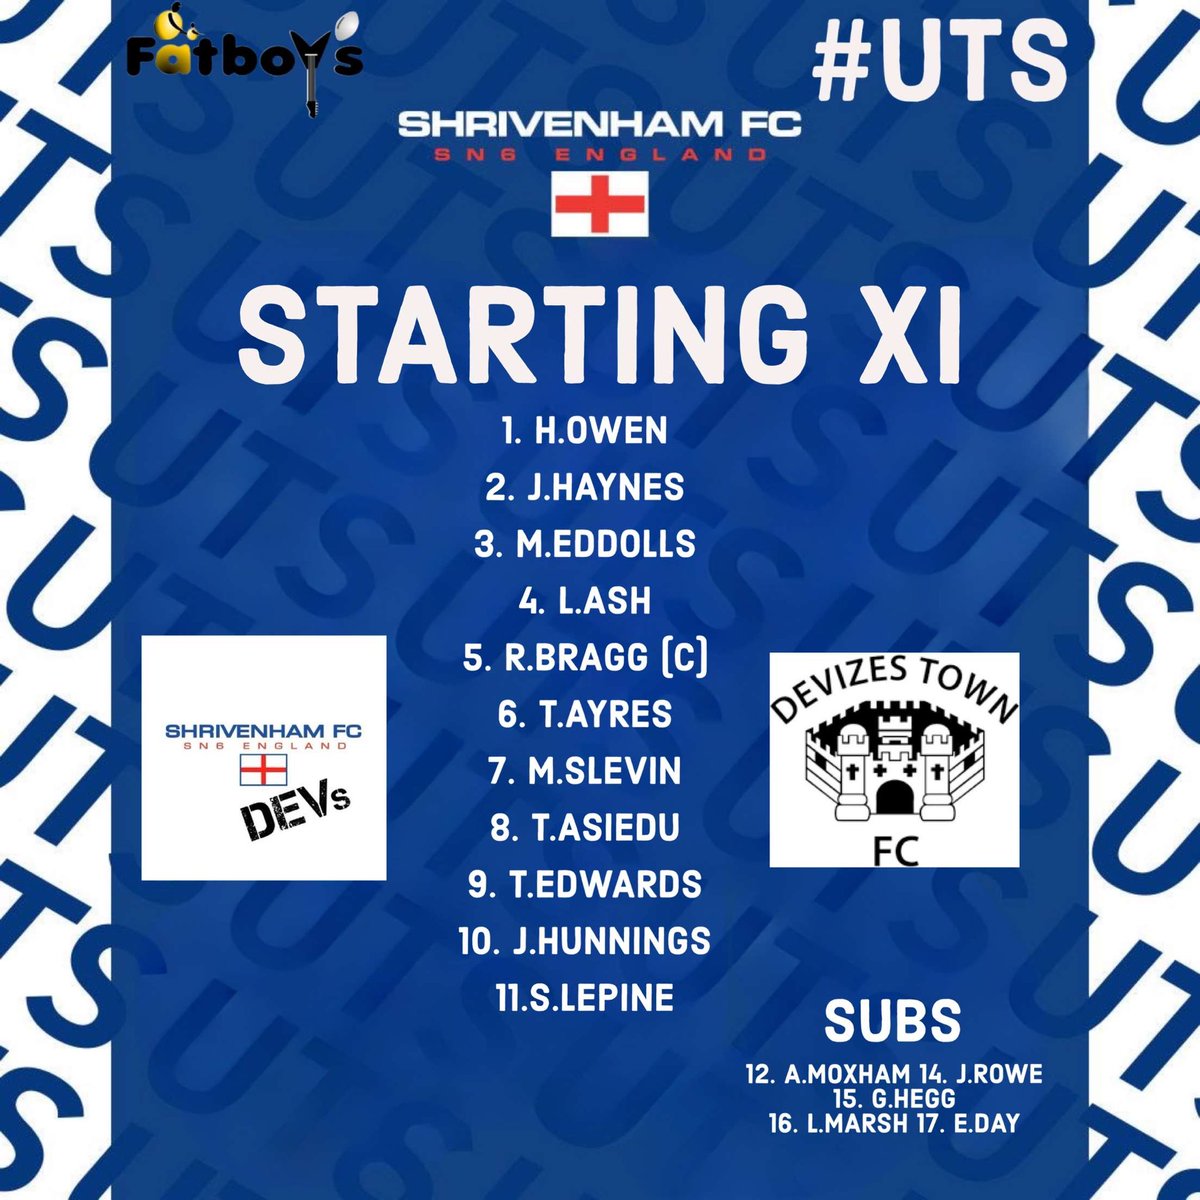 Todays line up 🔵⚪️ @DevReservesFC 

#UTS 🔵⚪️

Seriously strong bench 🔥

@WiltsLeague @OxOnFootball